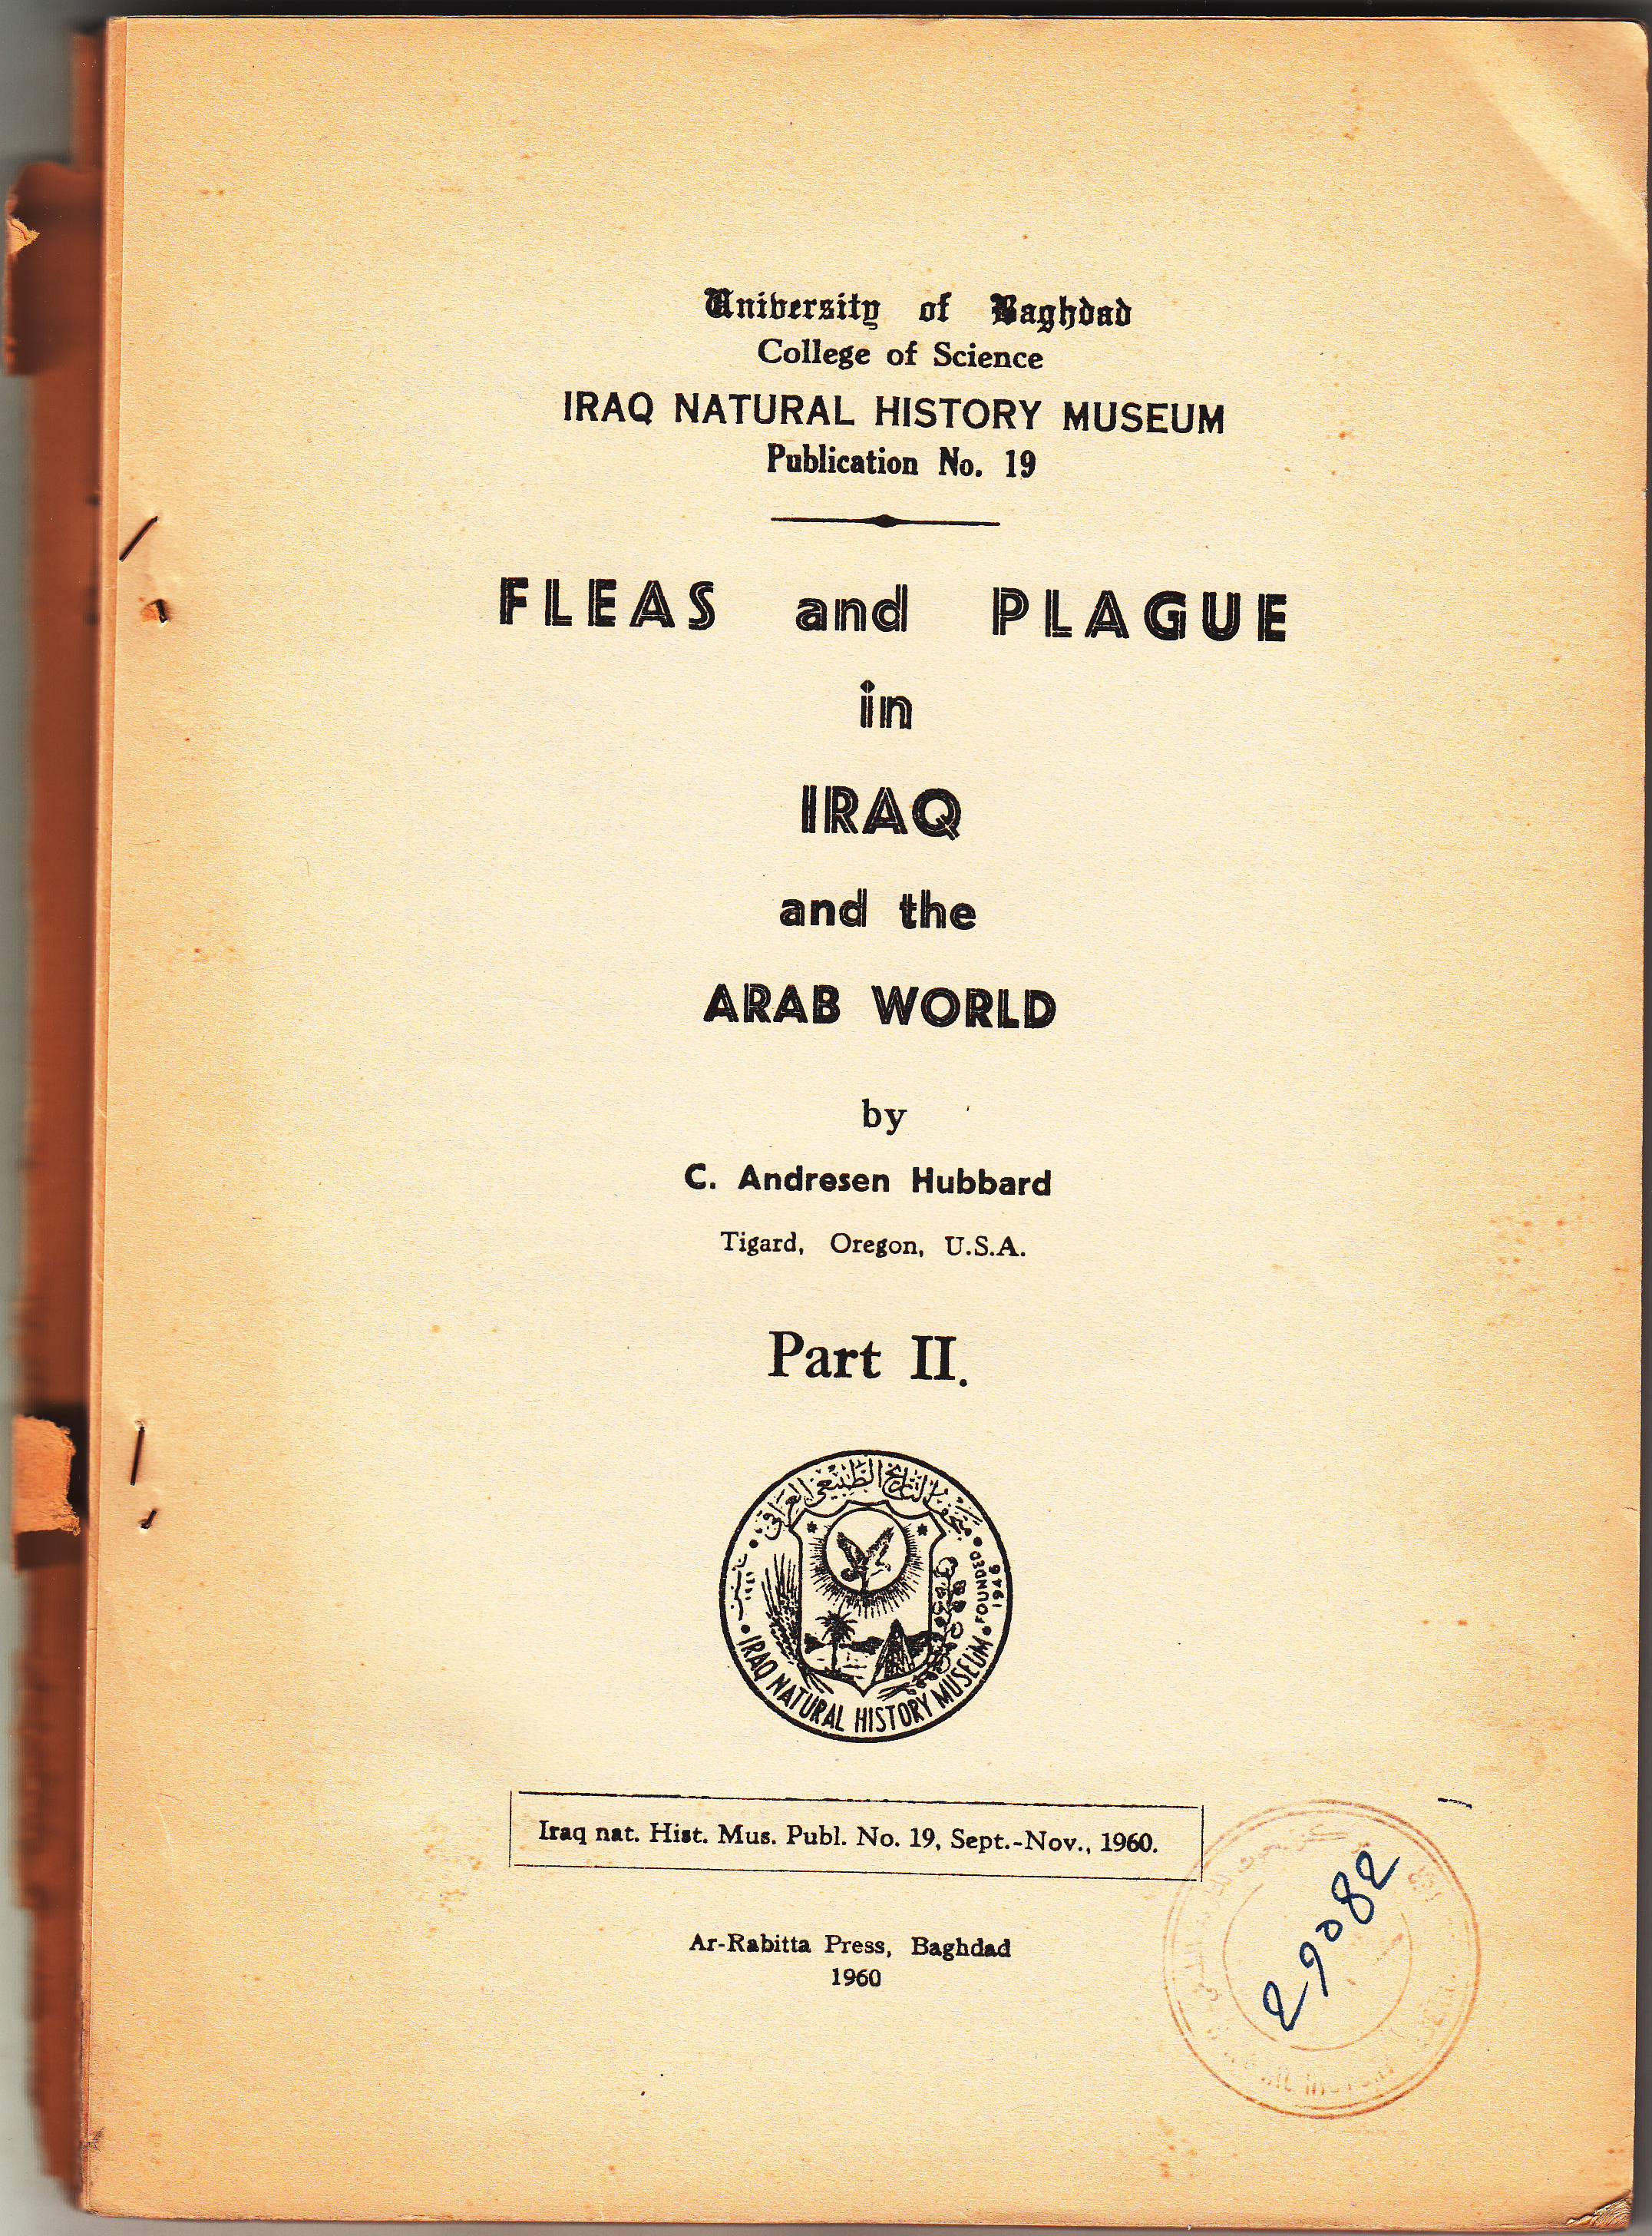 					View No. 19 (1960): FLEAS and PLAGUE in IRAQ and the ARAB WORLD by C. Andresen Hubbard Tigard, Oregon, U.S.A. Part II. Iraq nat. Hist. Mus. 
				